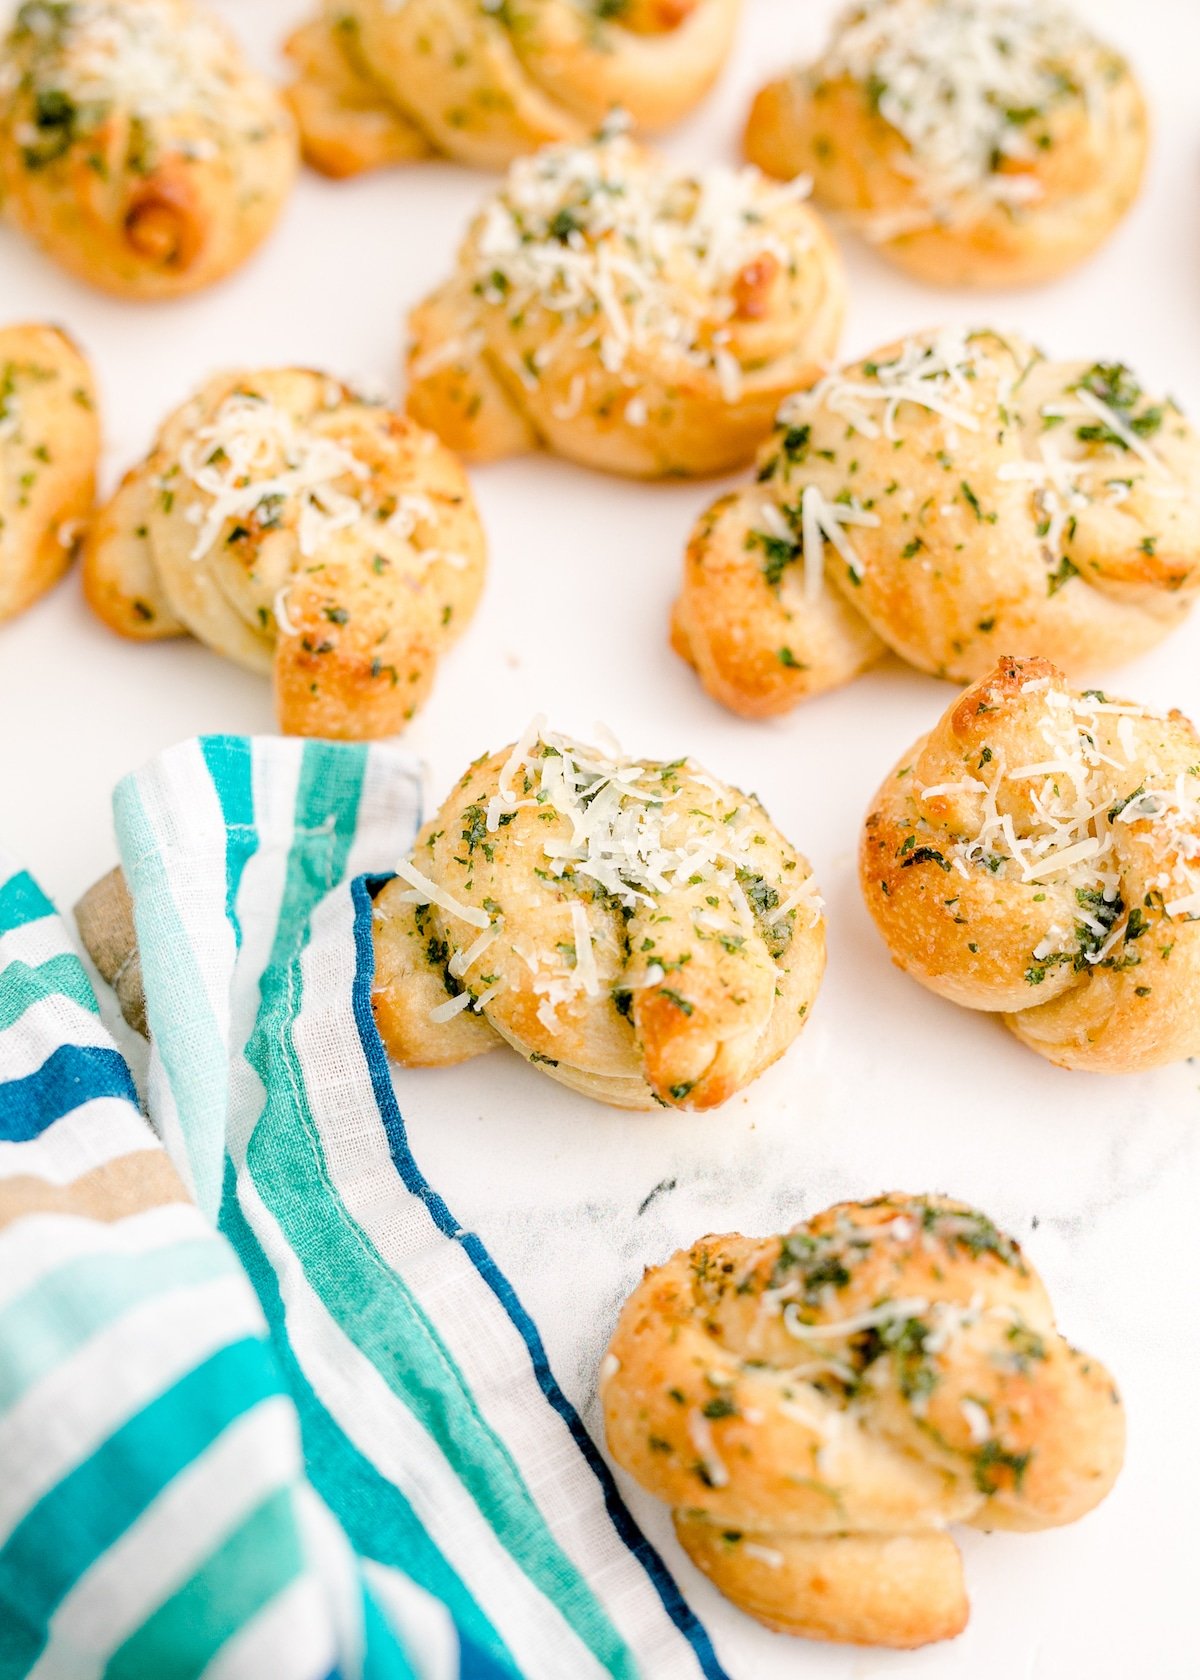 Baked garlic knots topped with garlic and herb butter.